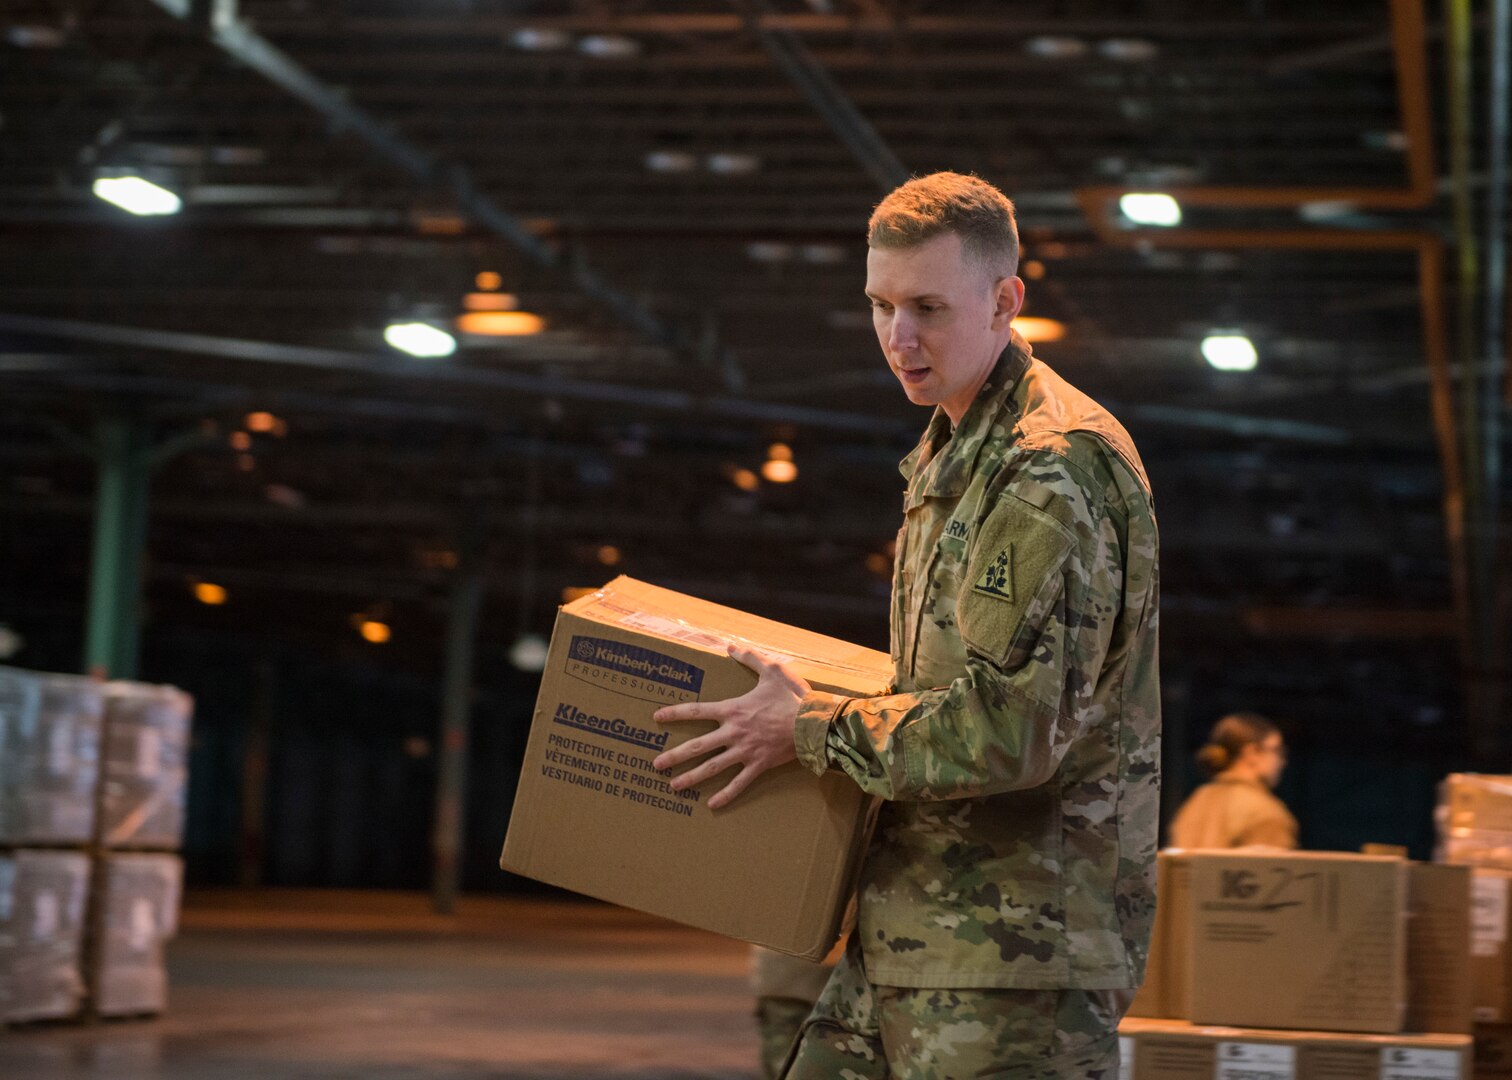 Sgt. Evan Dupree, 1048th Medium Truck Company transportation specialist, organizes boxes containing personal protective equipment at a warehouse in New Britain, Connecticut, March 30, 2020. The Connecticut National Guard  is helping distribute personal protective equipment, medical supplies, and medical equipment in response to the COVID-19 pandemic.